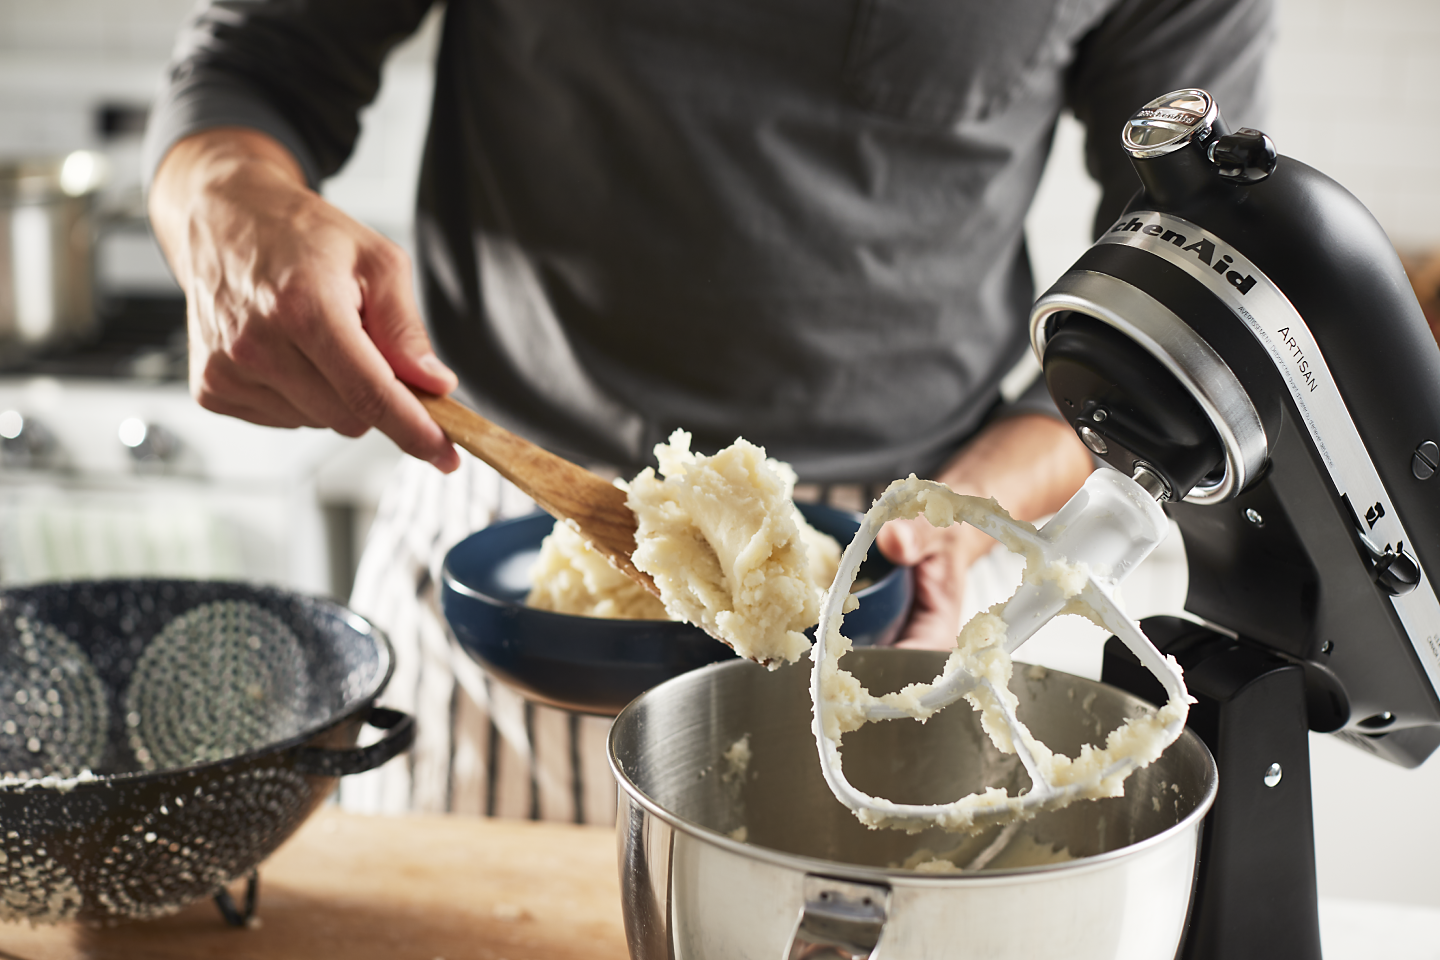 Man scooping mashed potatoes out of a stand mixer into a serving bowl